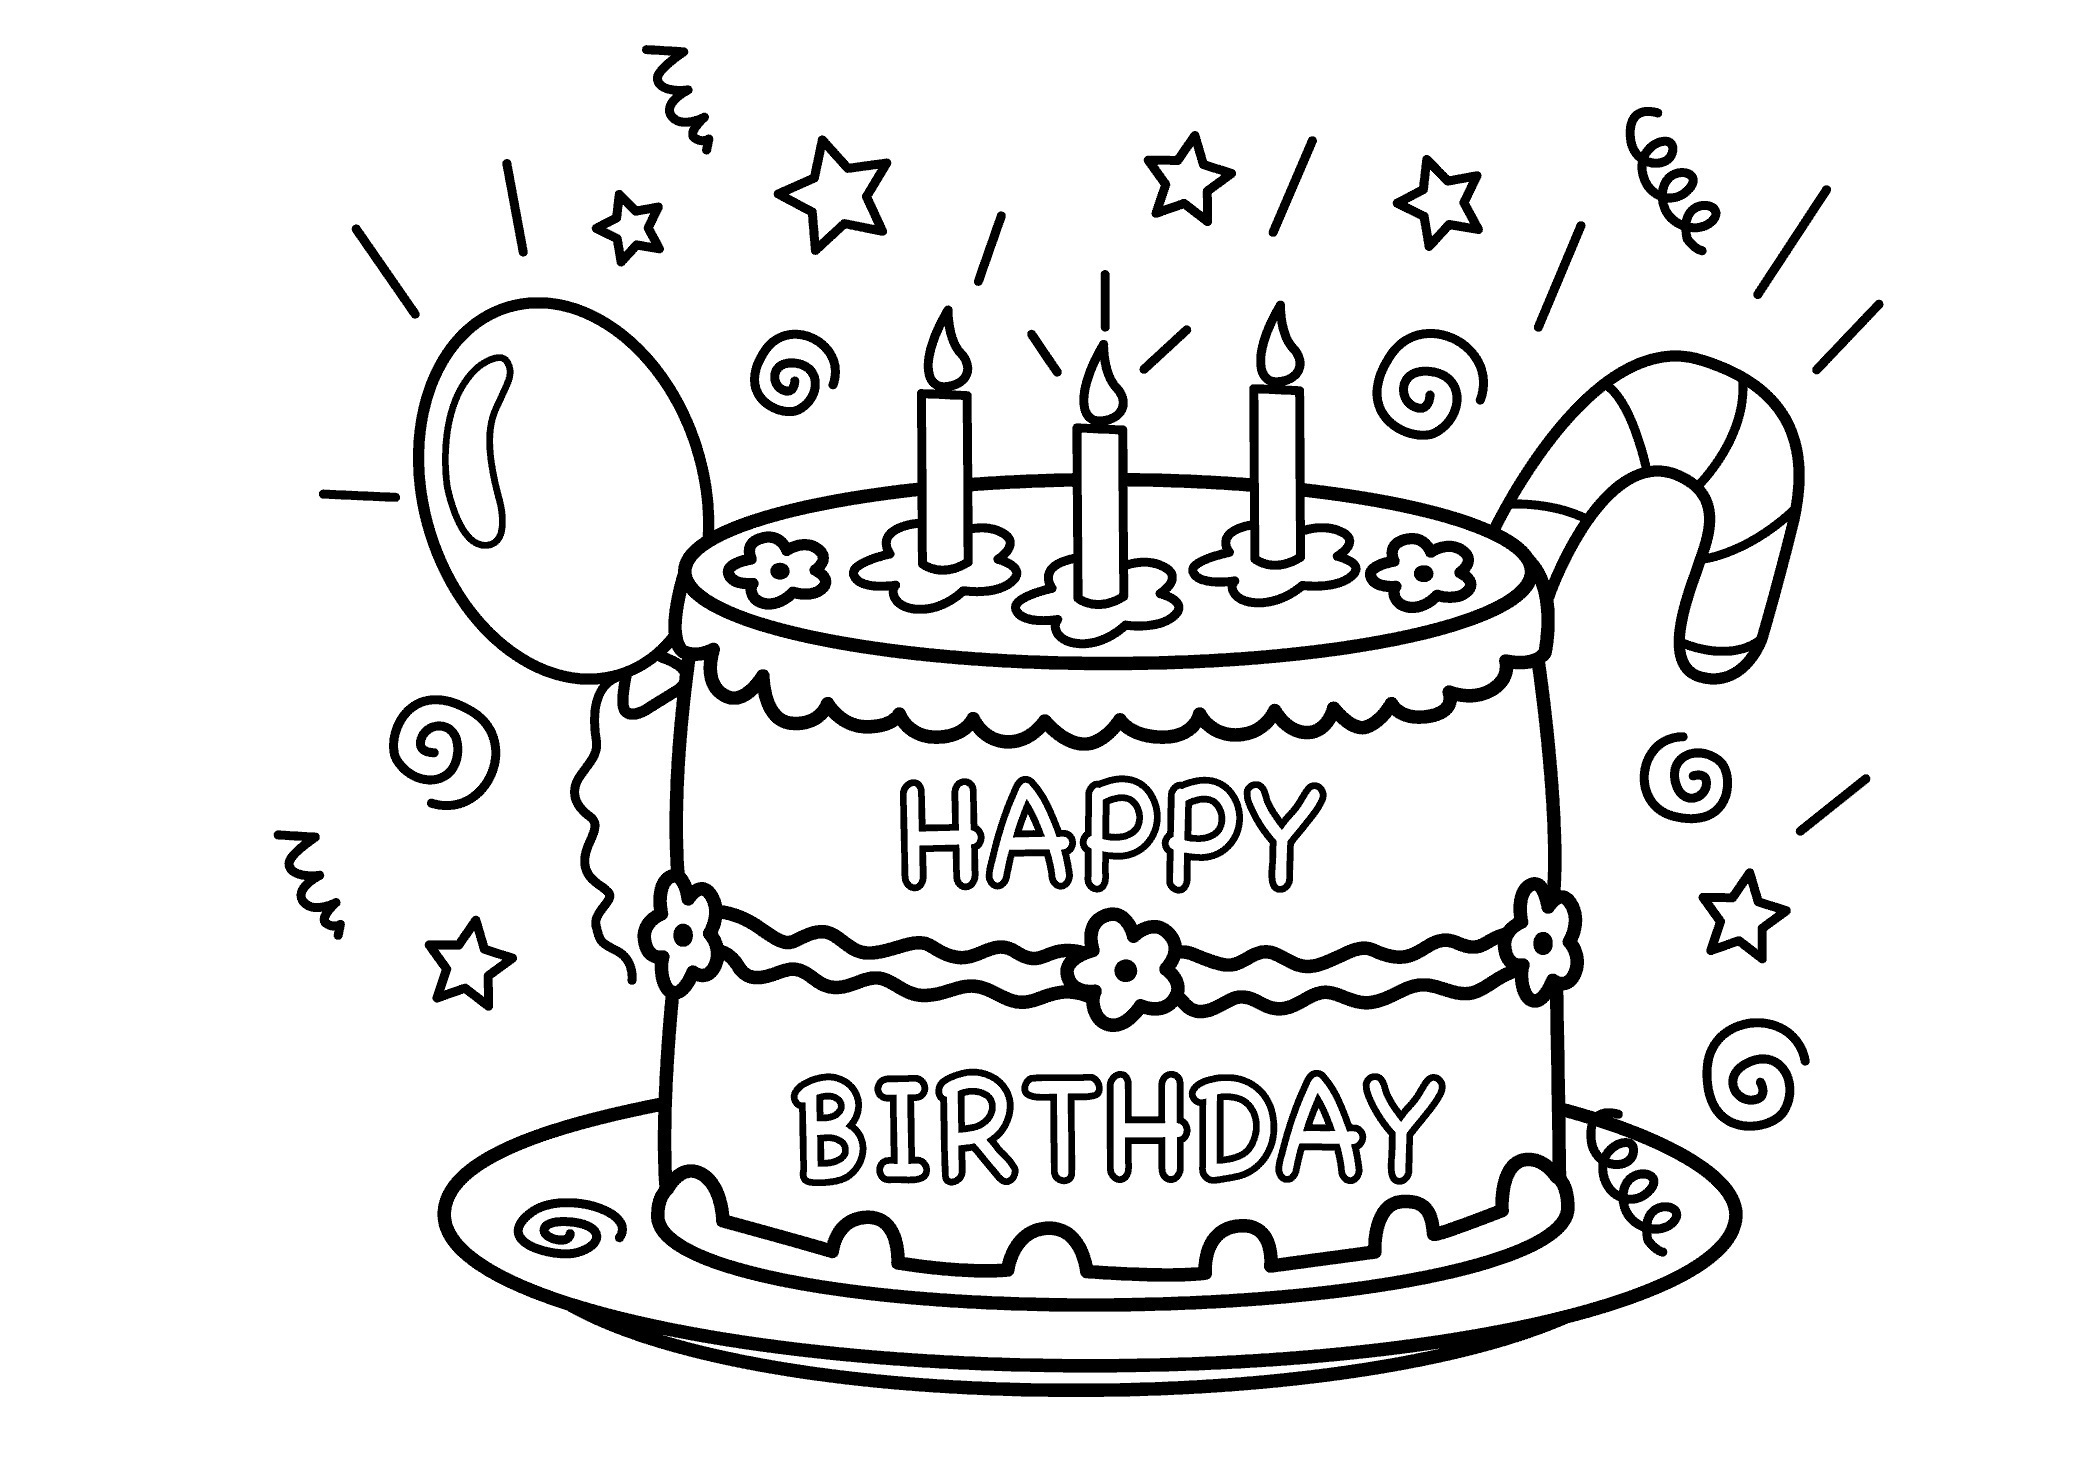 Free Printable Birthday Cake Coloring Pages For Kids - Free Printable Birthday Cake